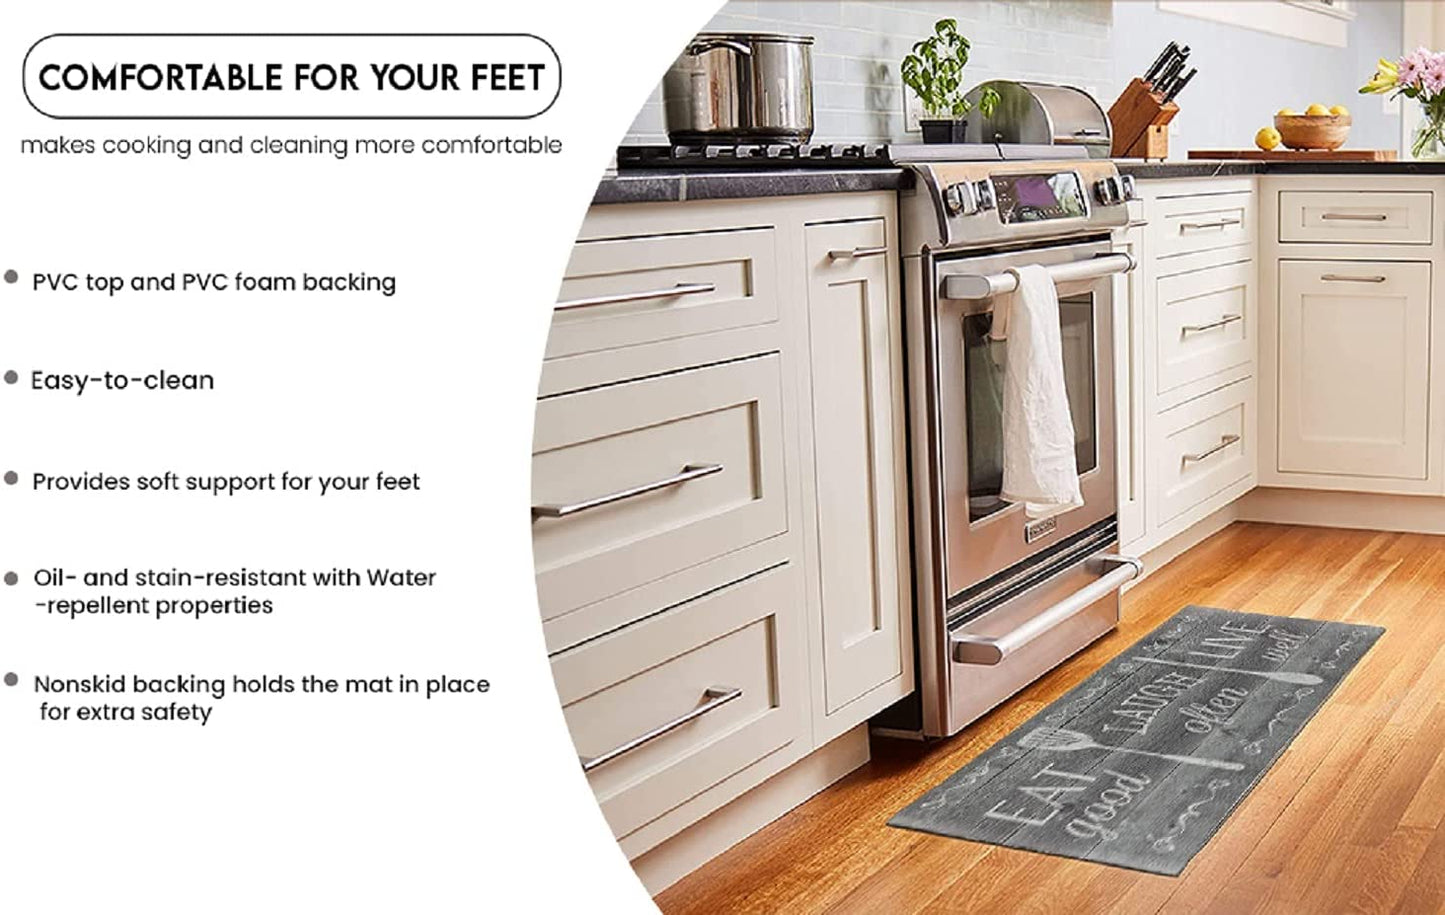 Kitchen Mat Cushioned anti Fatigue Floor Mat,19.6"X55", Thick Non Slip Waterproof Kitchen Rugs and Mats, Standing Mat for Kitchen,Floor,Home,Office,Desk,Sink,Laundry (Home Heartwood)